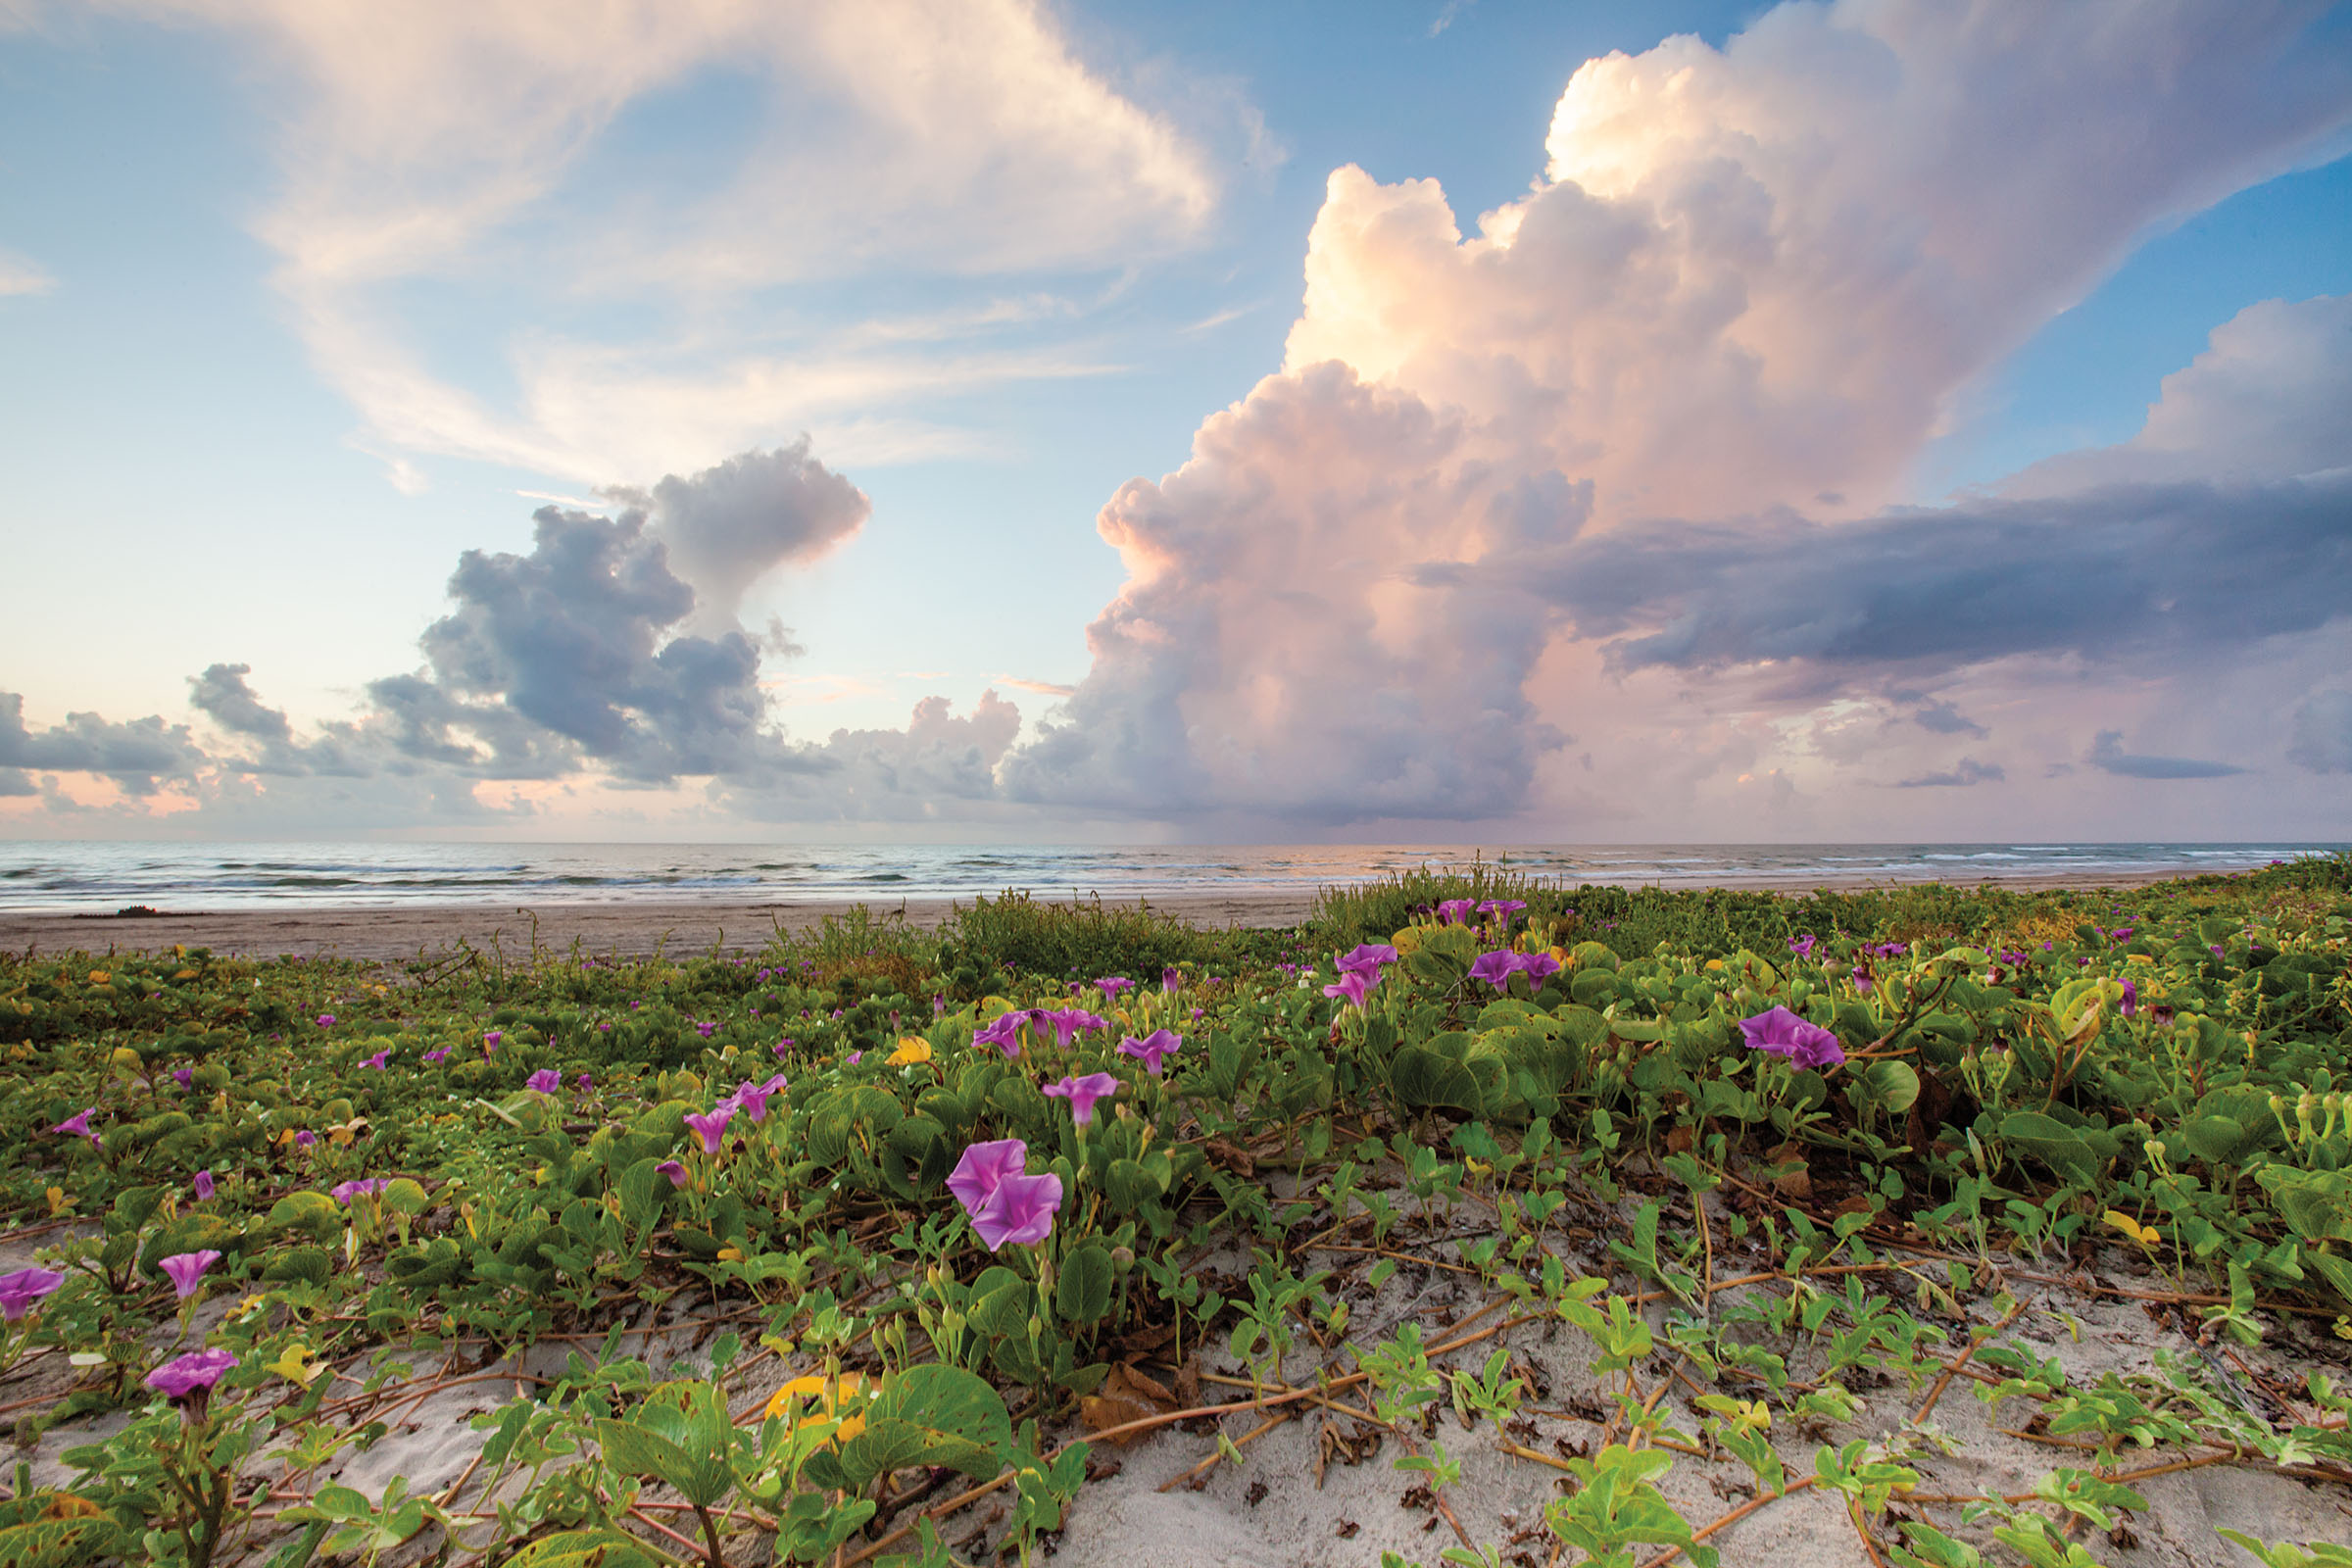 Railroad Vine blooming on South Padre Island beach, morning clouds over Gulf of Mexico